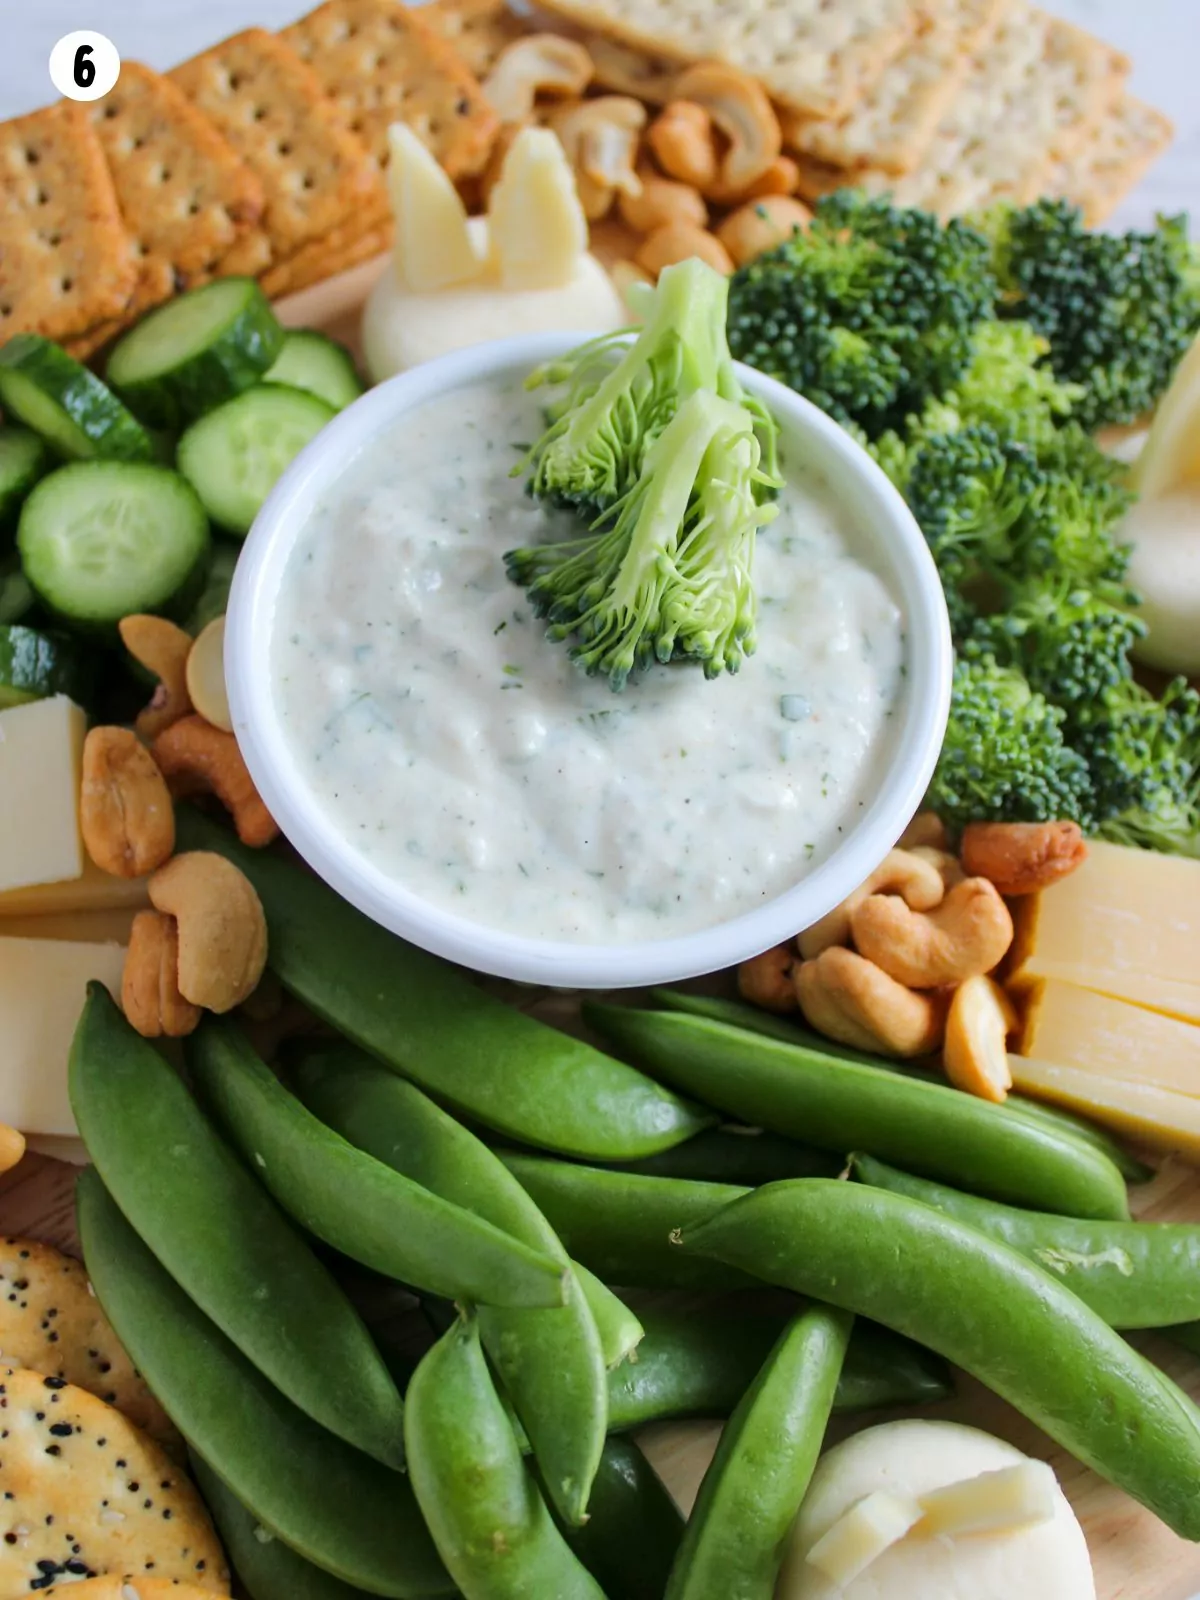 piece of broccoli being dipped in ranch dip.